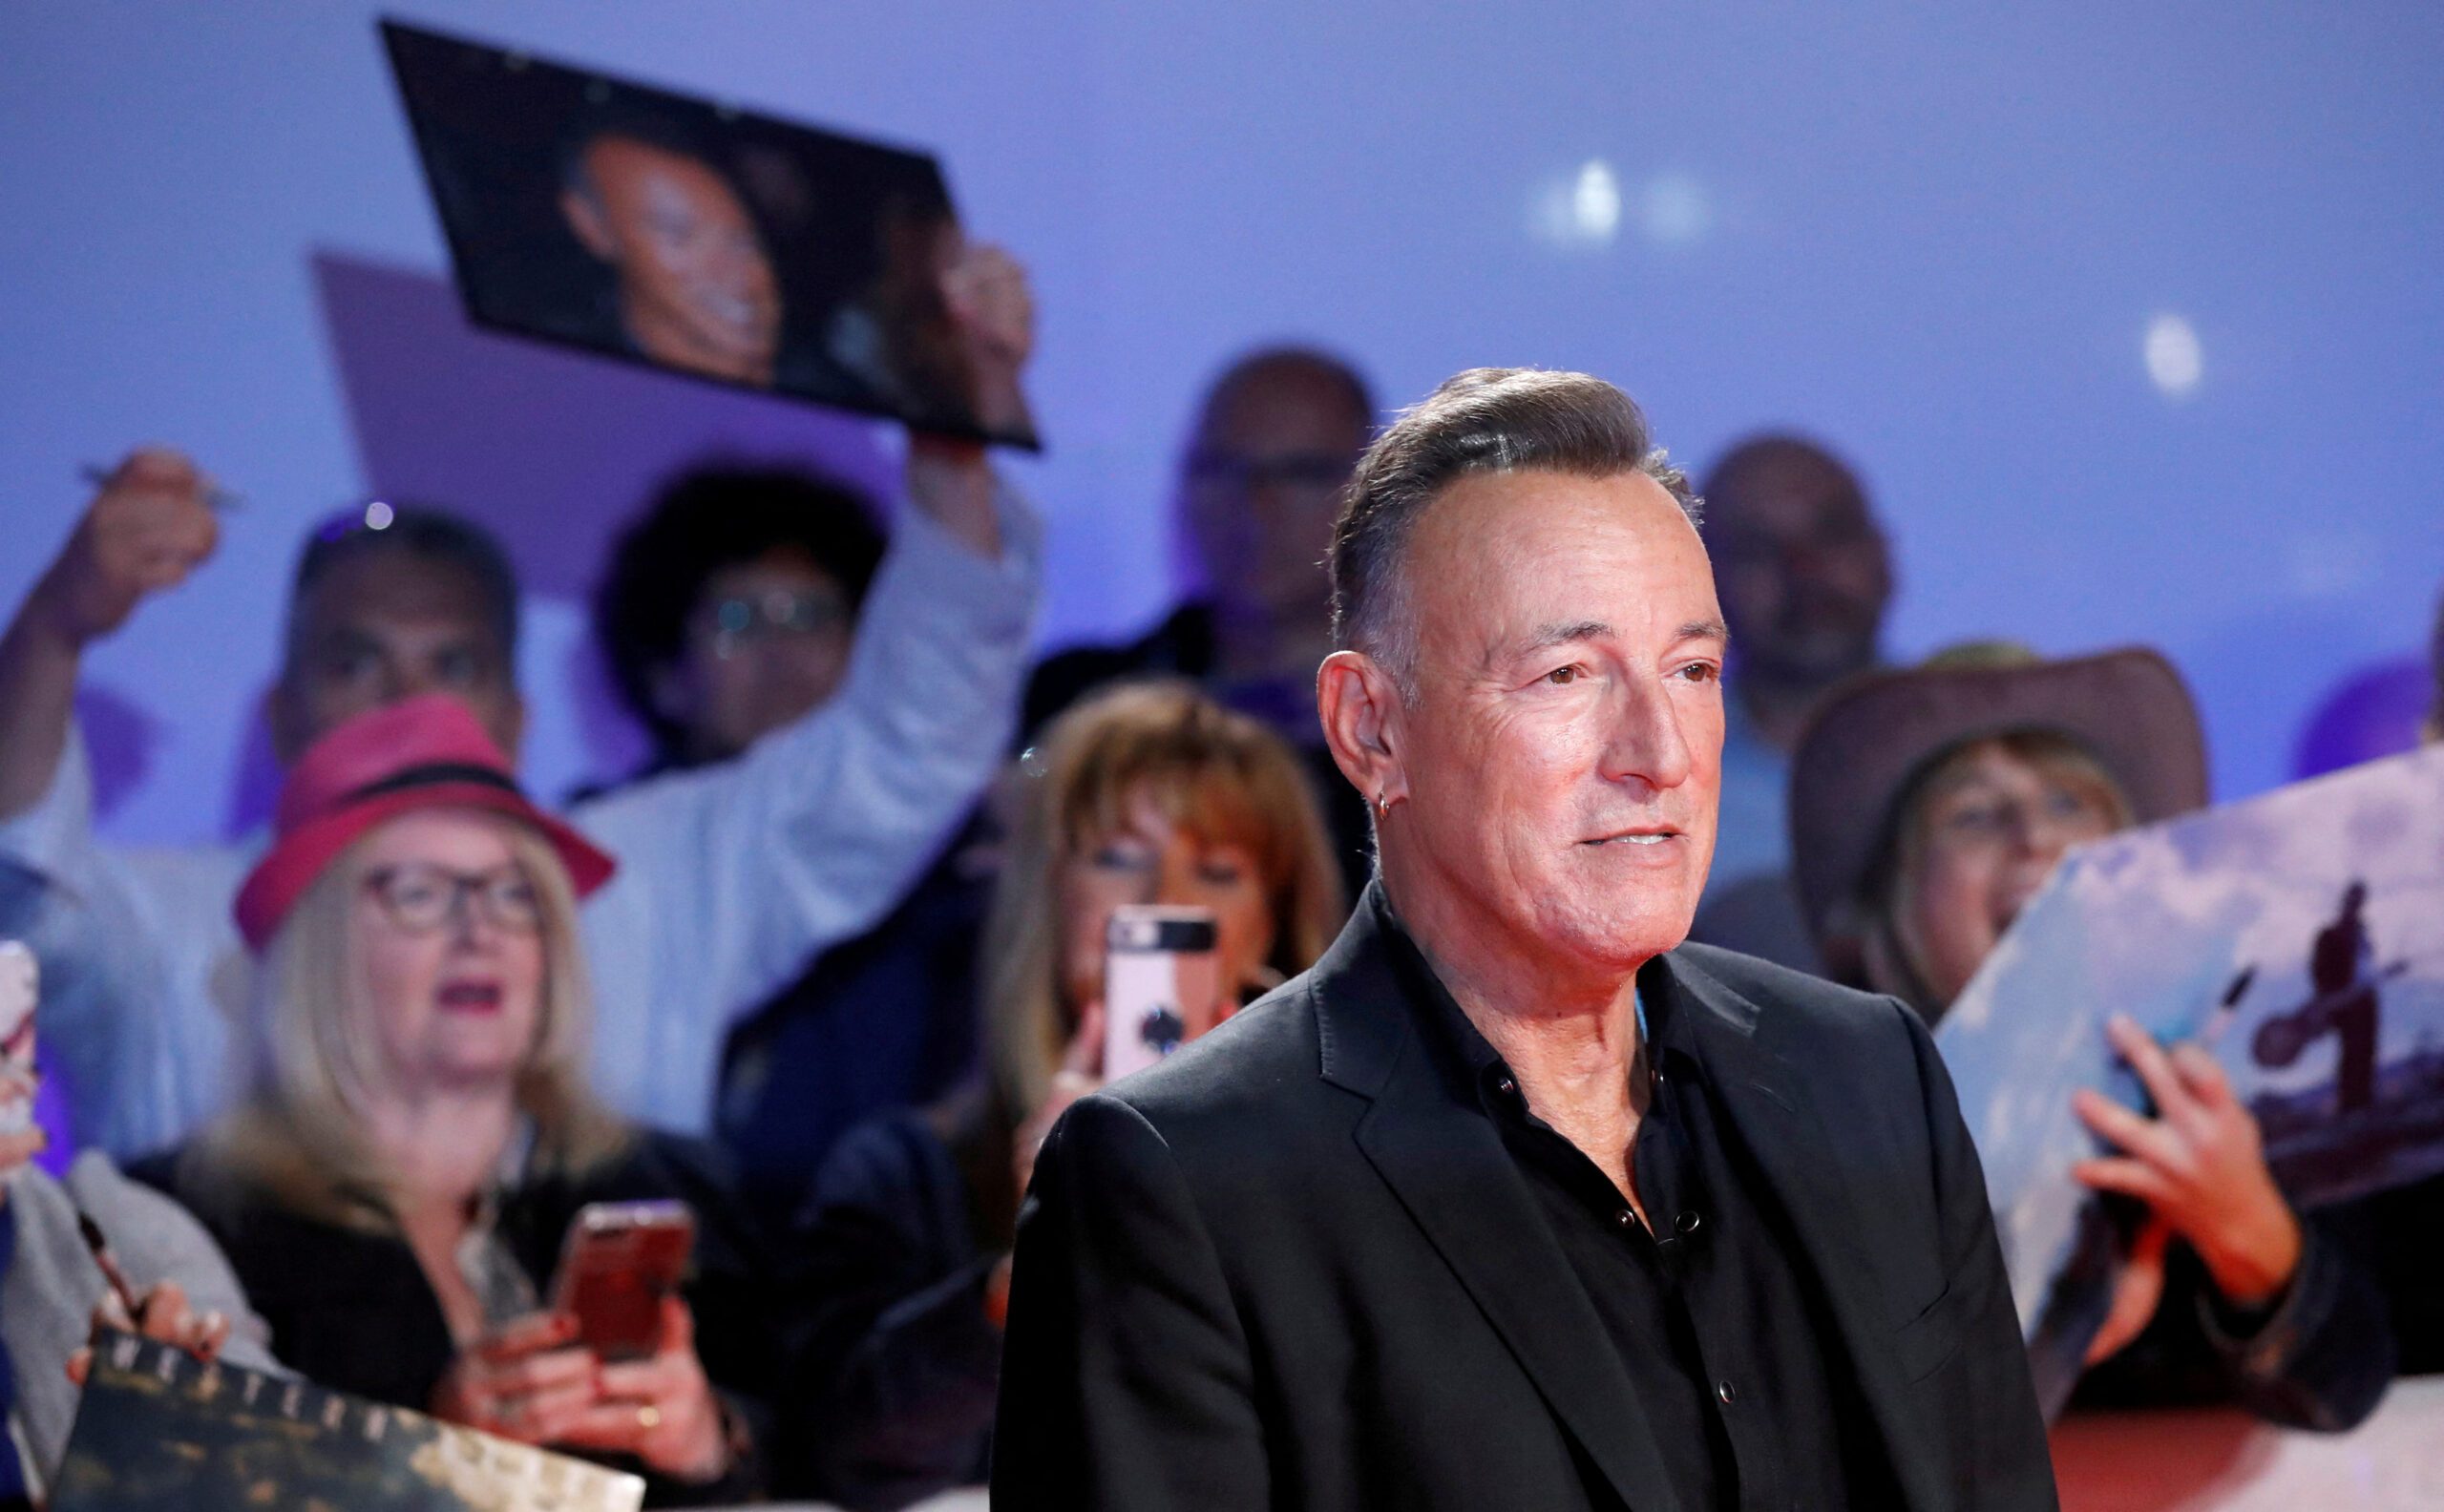 Bruce Springsteen to receive highest honor at Ivors songwriting awards